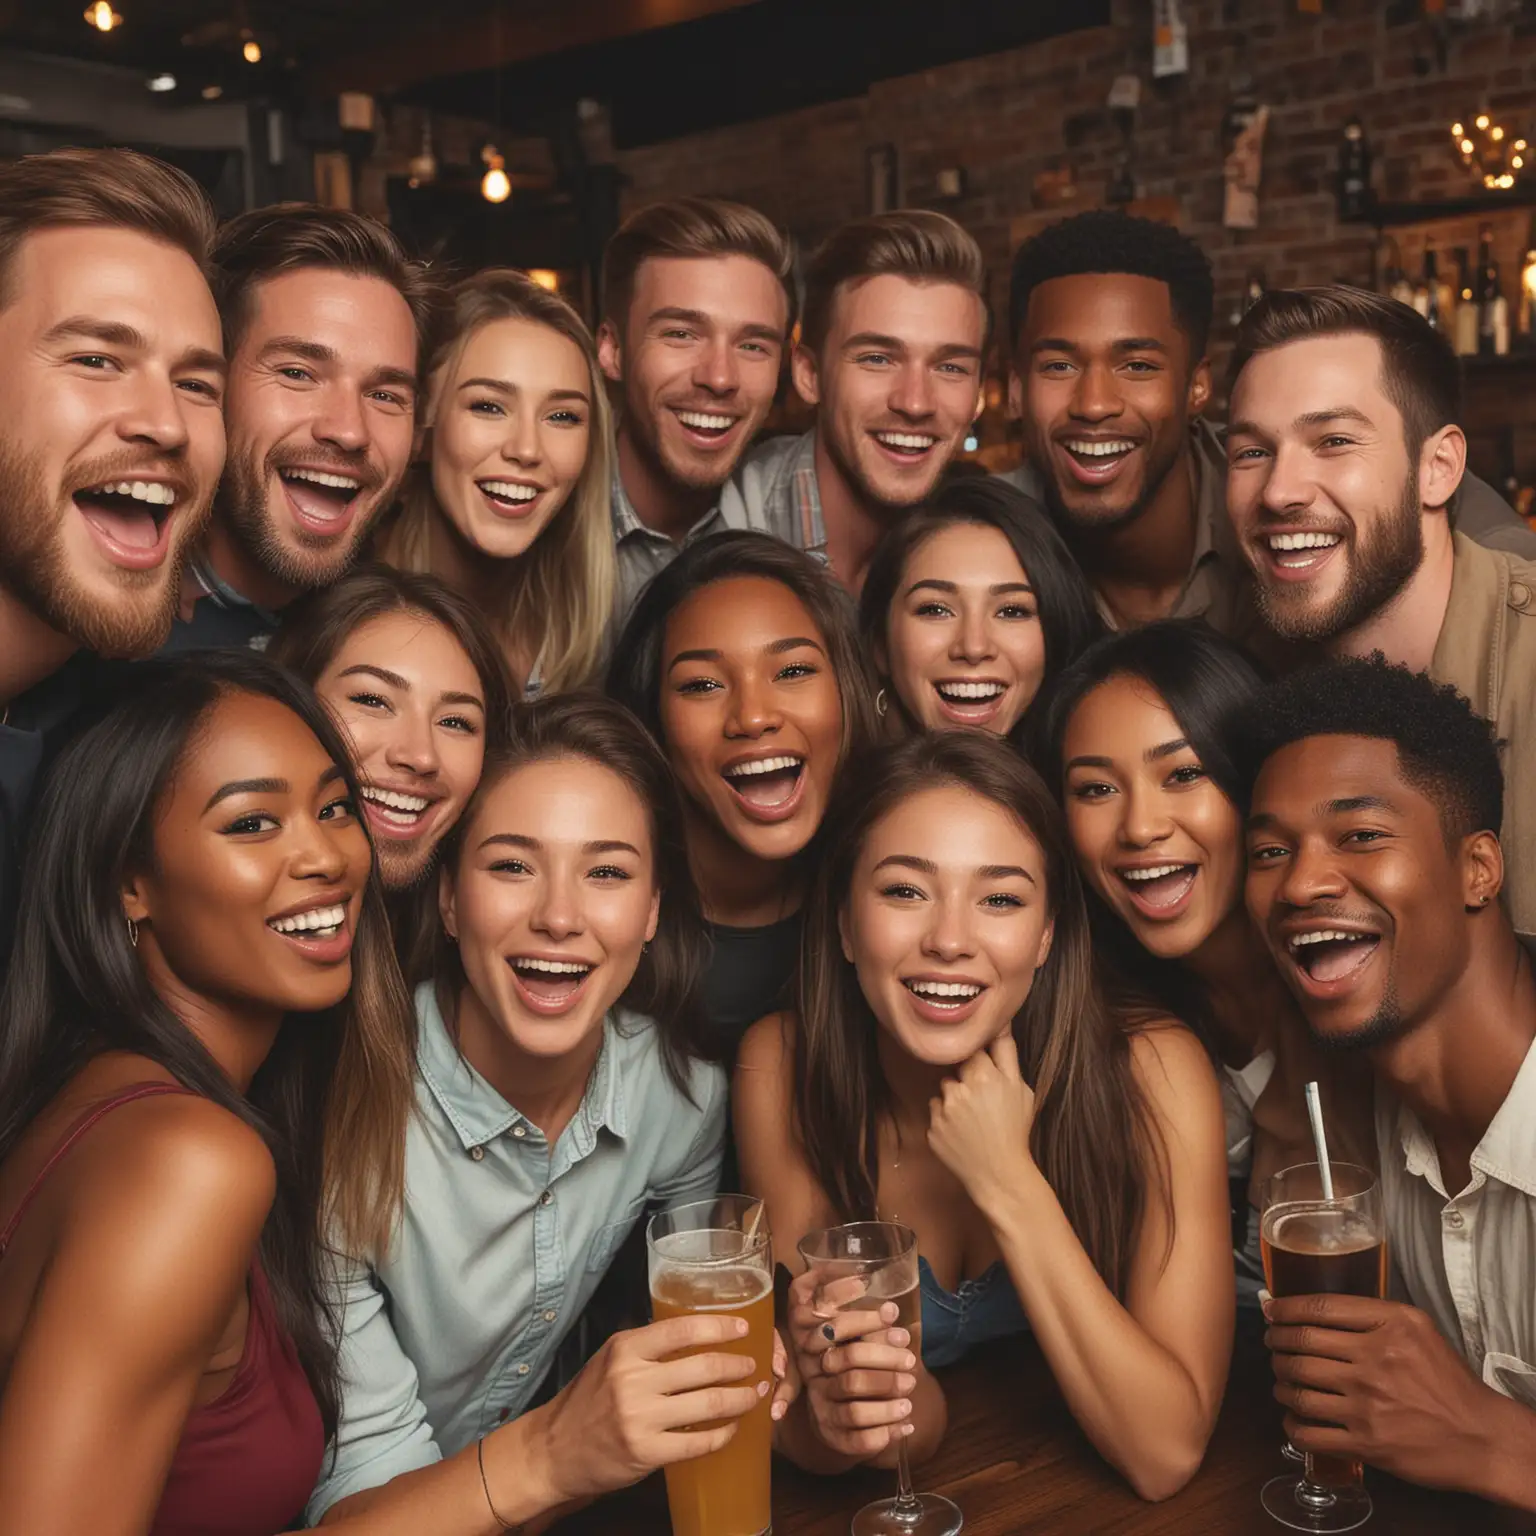 A group of people were having a party at the bar to celebrate. There were men, women, Caucasians, African Americans, and Asians, with exquisite facial features.